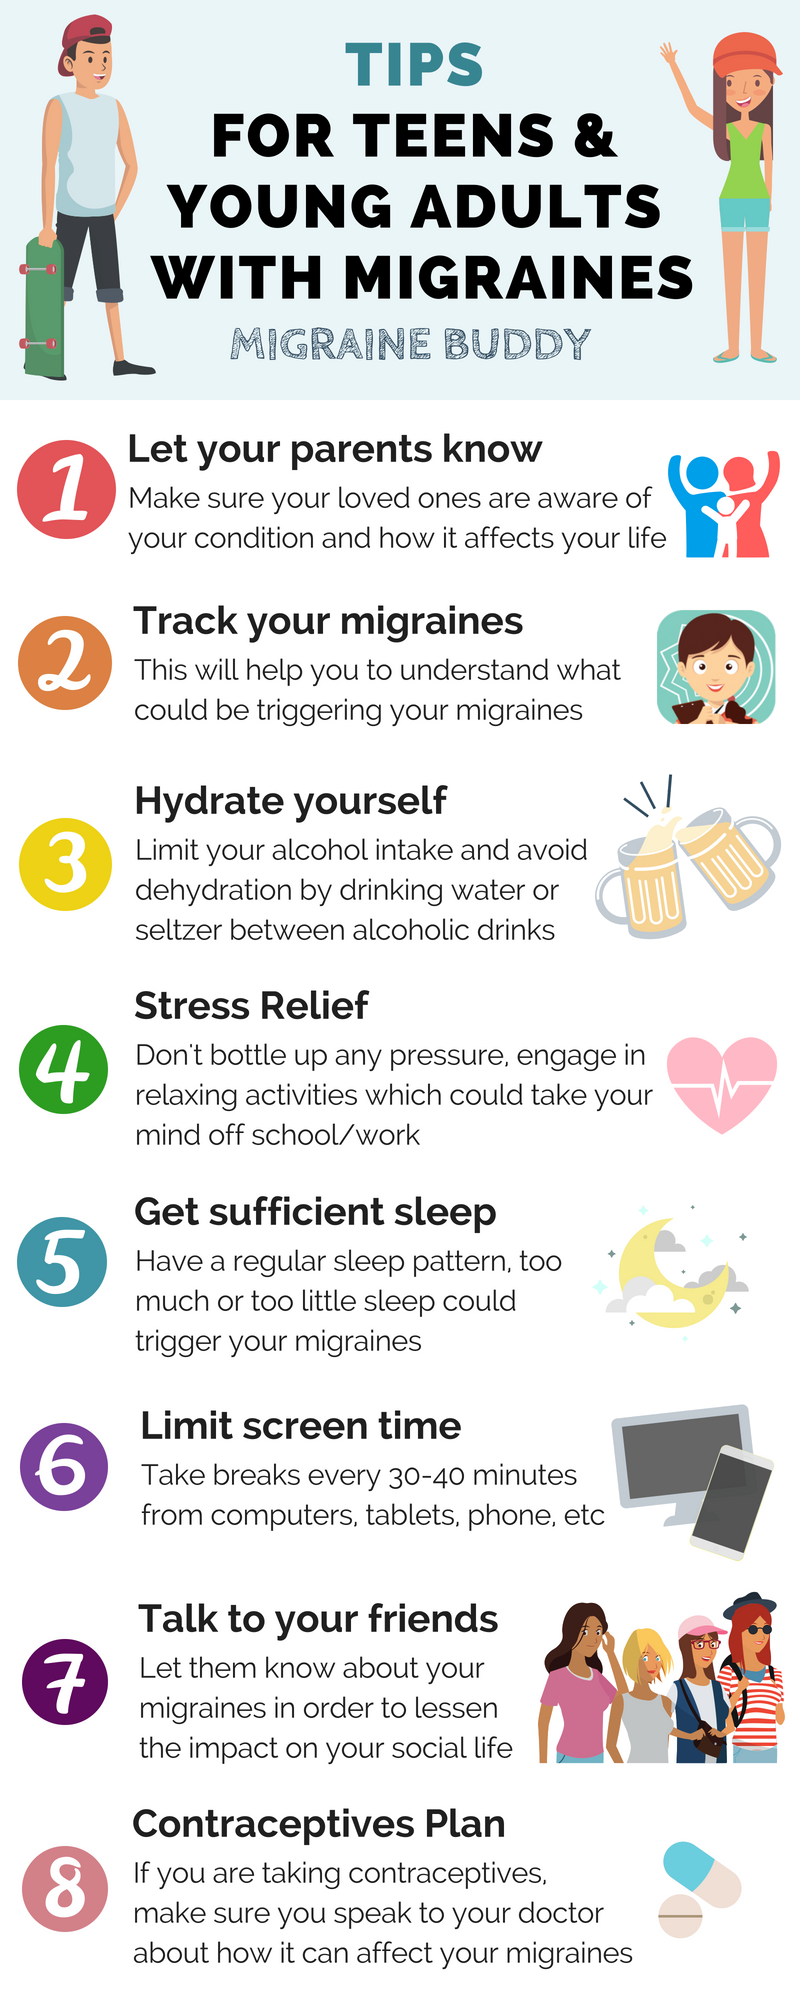 Tips for Teens and Young Adults with Migraines.png